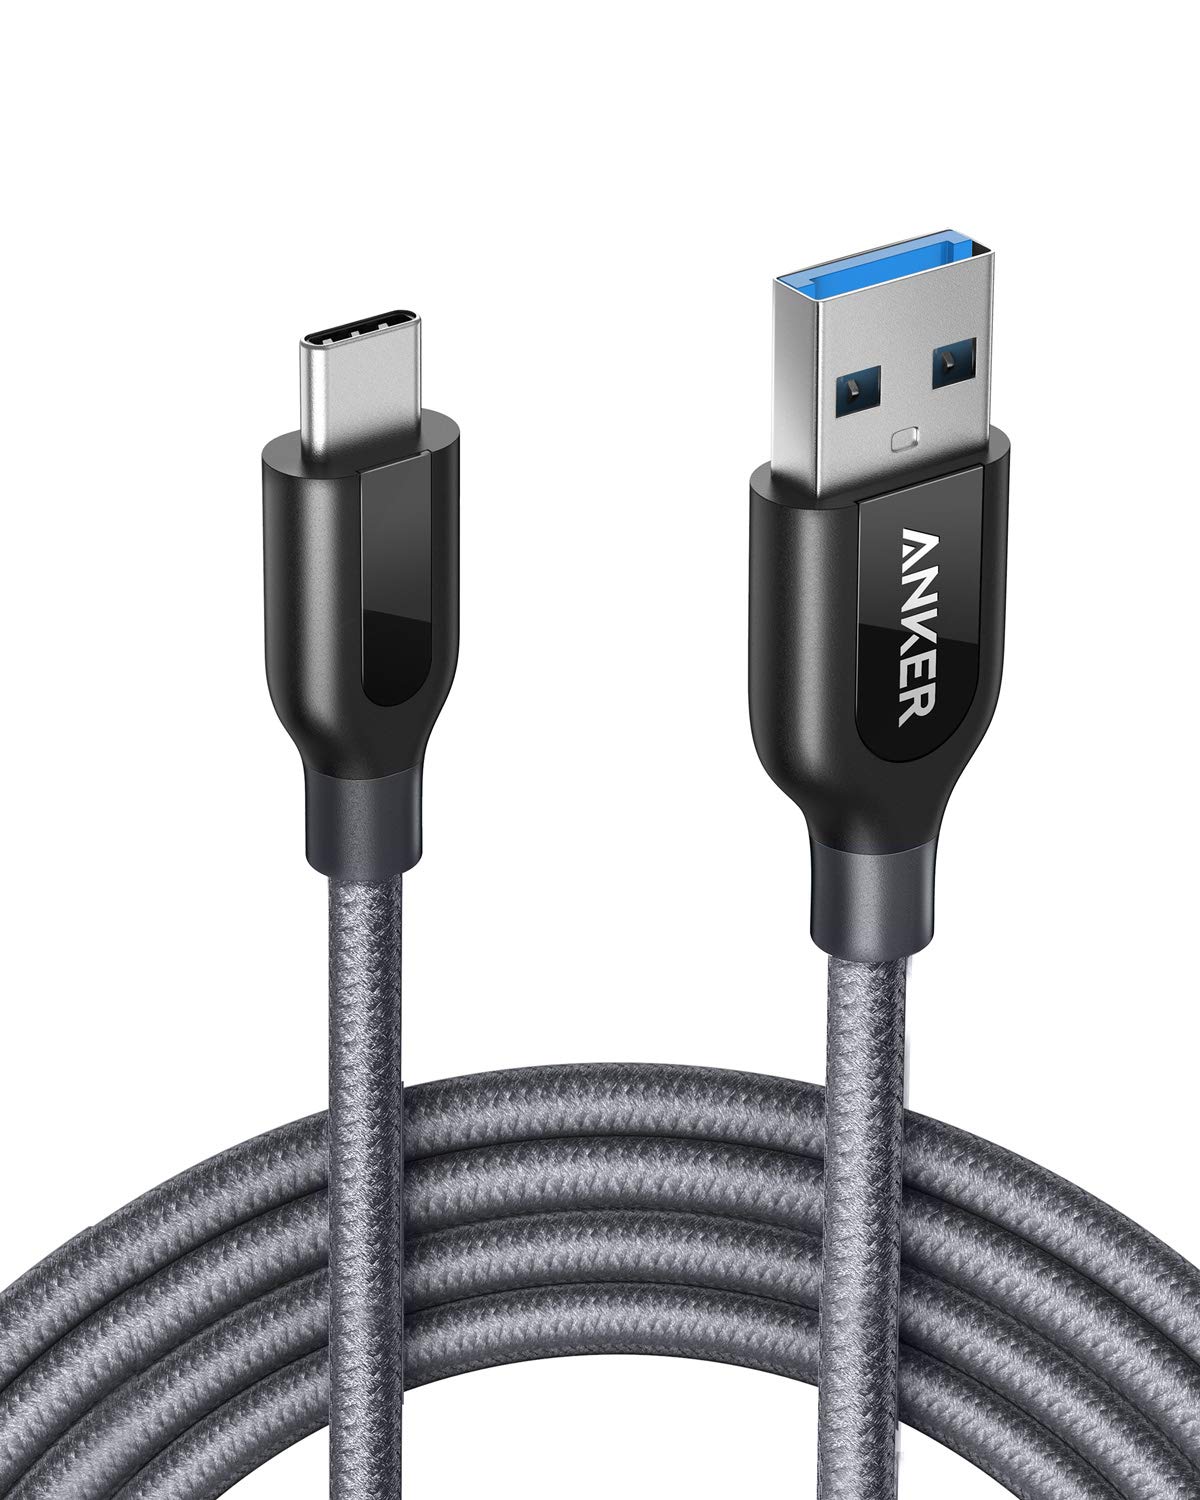 Book Cover USB Type C Cable, Anker PowerLine+ USB C to USB 3.0 Cable (6ft), High Durability, for Samsung Galaxy Note 8, S8, S8+, S9, S10, Sony XZ, LG V20 G5 G6, HTC 10, Xiaomi 5 and More. 6ft Grey